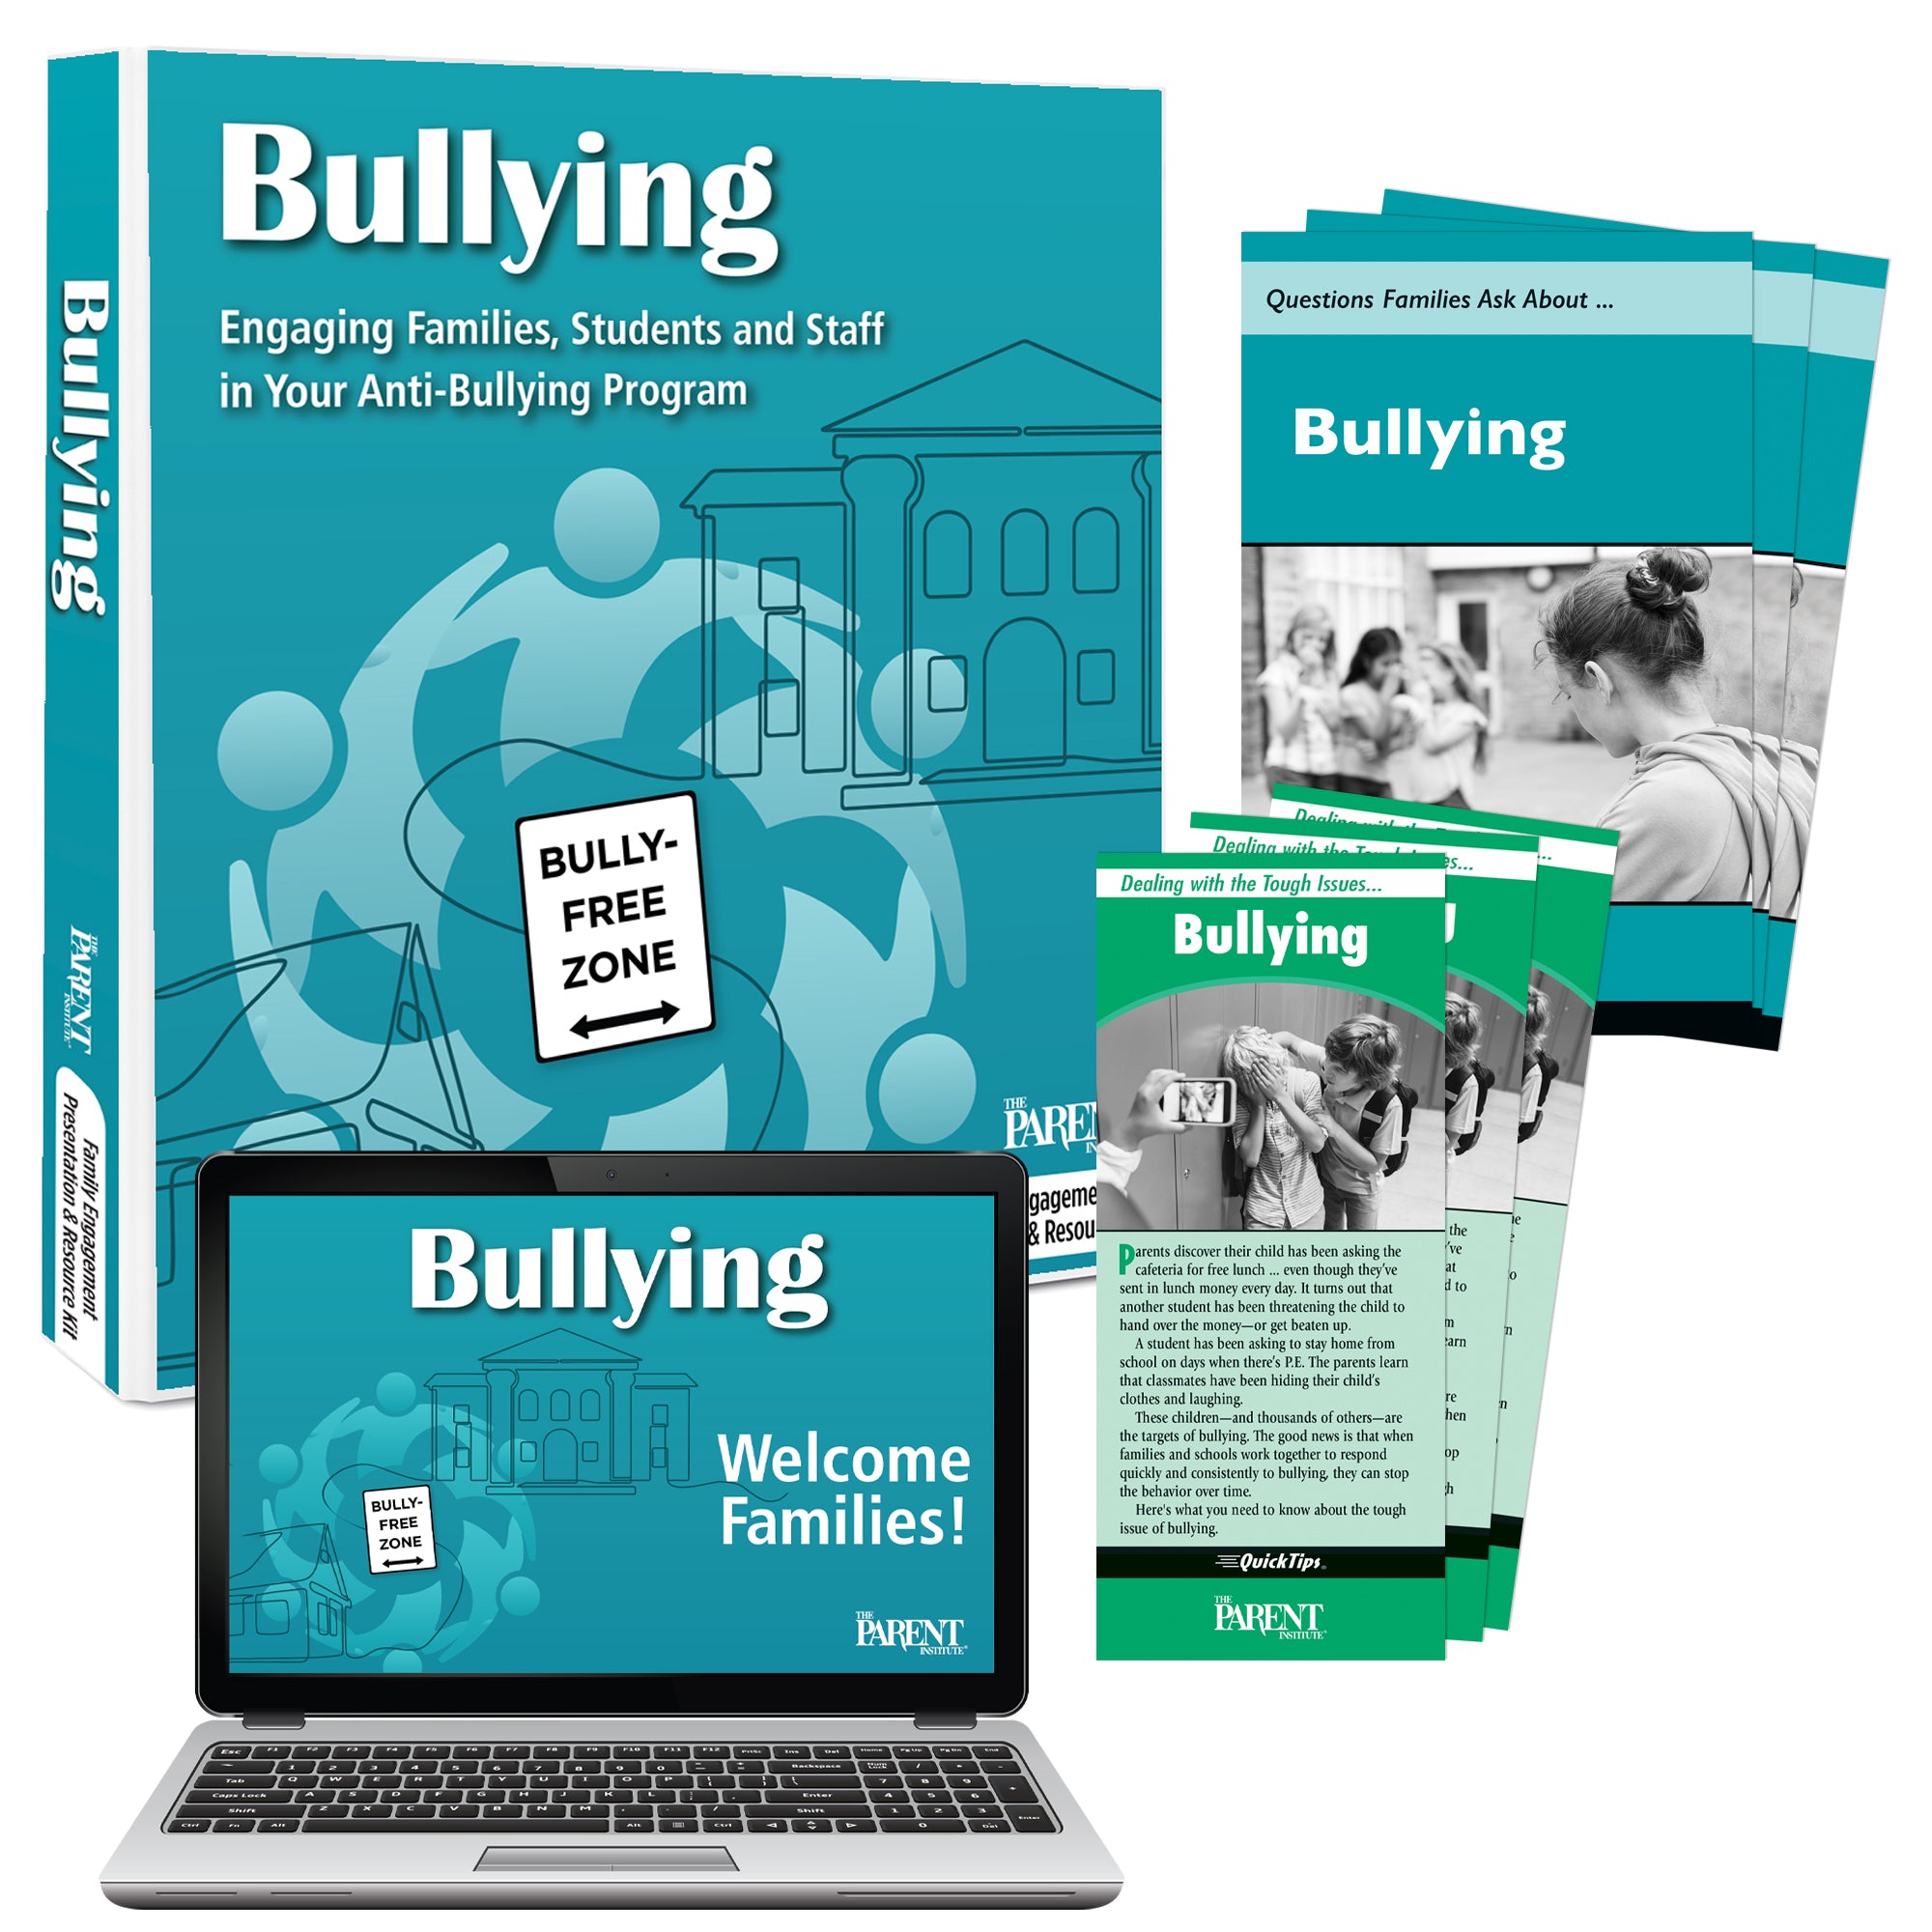 Bullying: Engaging Families, Students and Staff in Your Anti-Bullying Program Resource Kit for Families